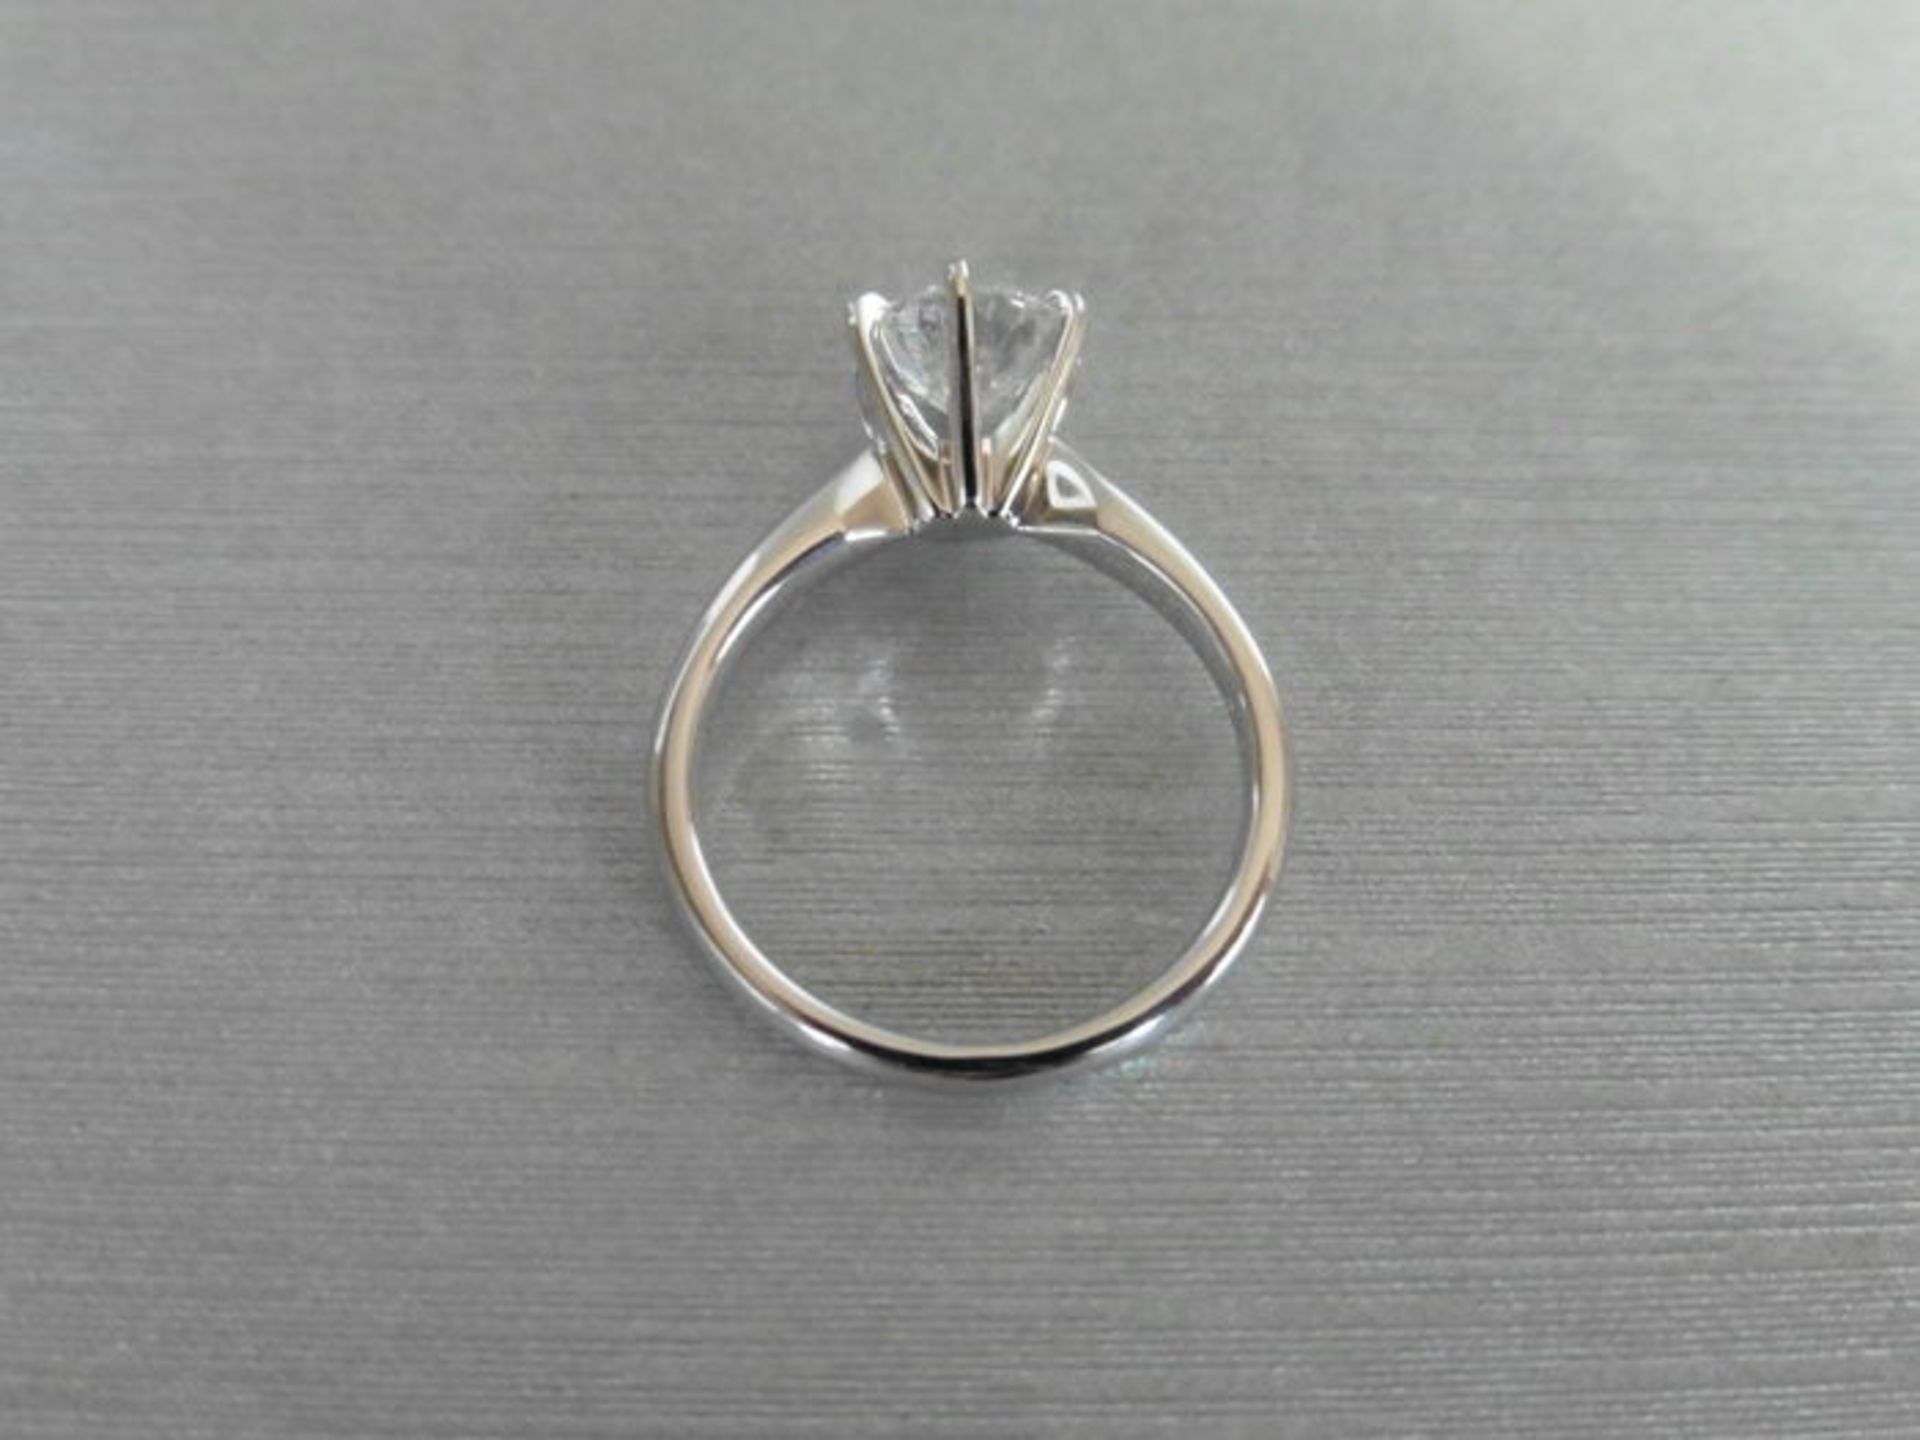 1.01ct diamond solitaire ring set in 18ct white gold. J colour and I1-2 clarity. 6 claw setting, - Image 2 of 3